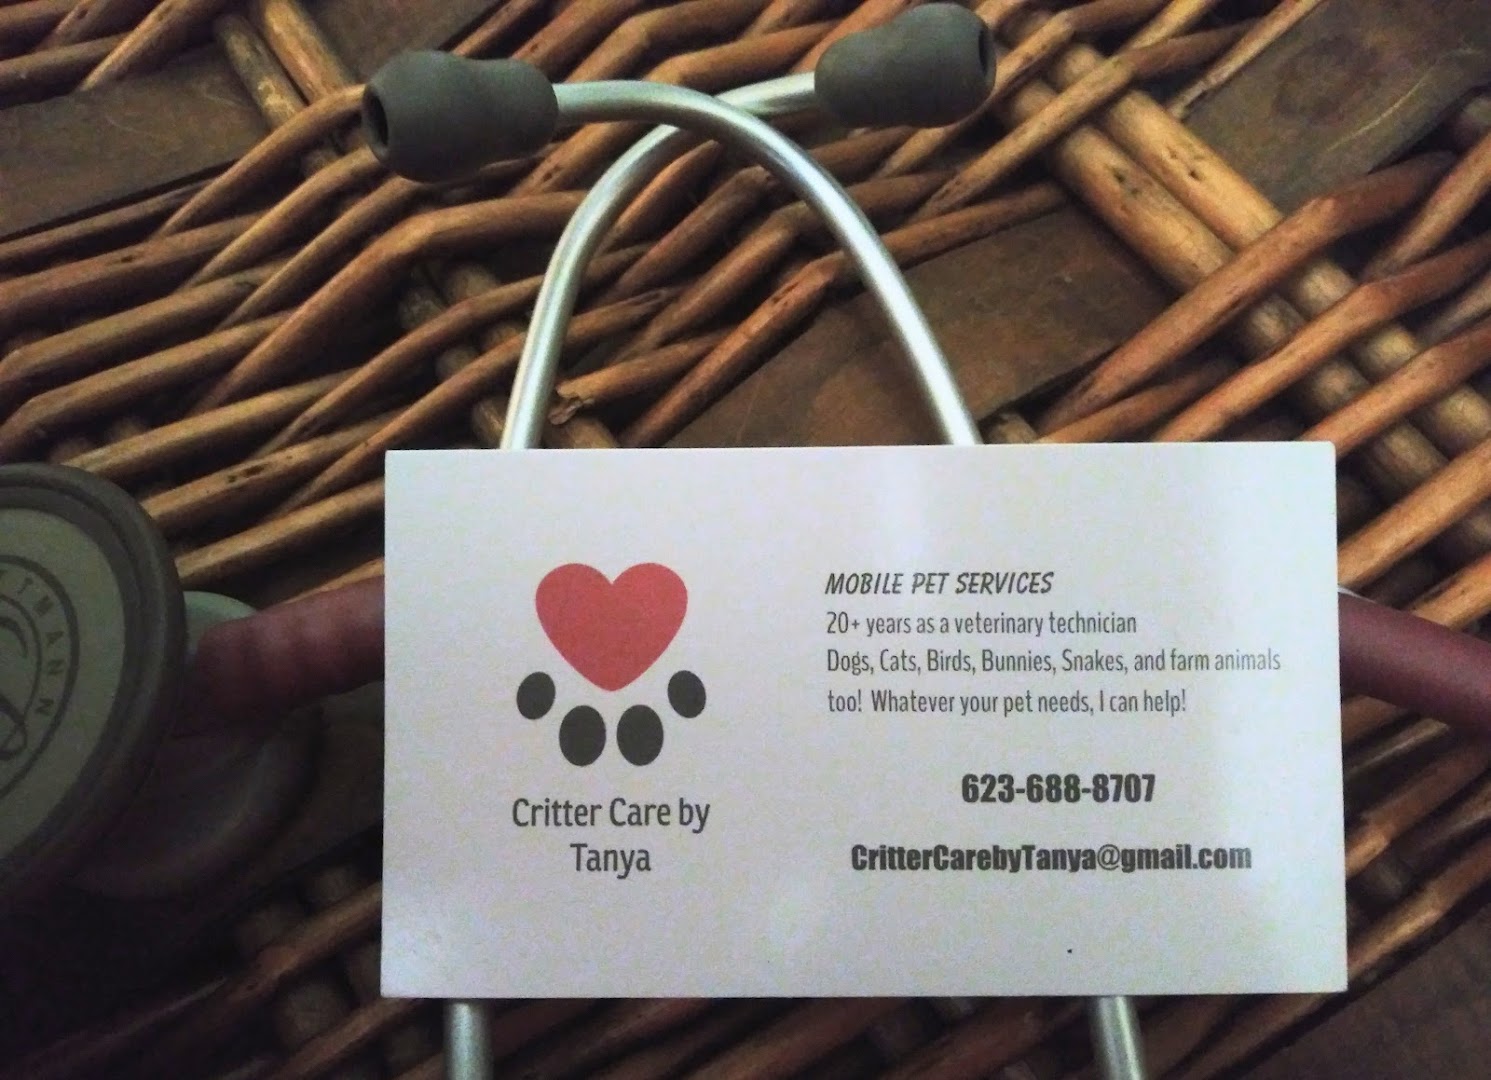 Critter Care by Tanya Mobile Pet Services